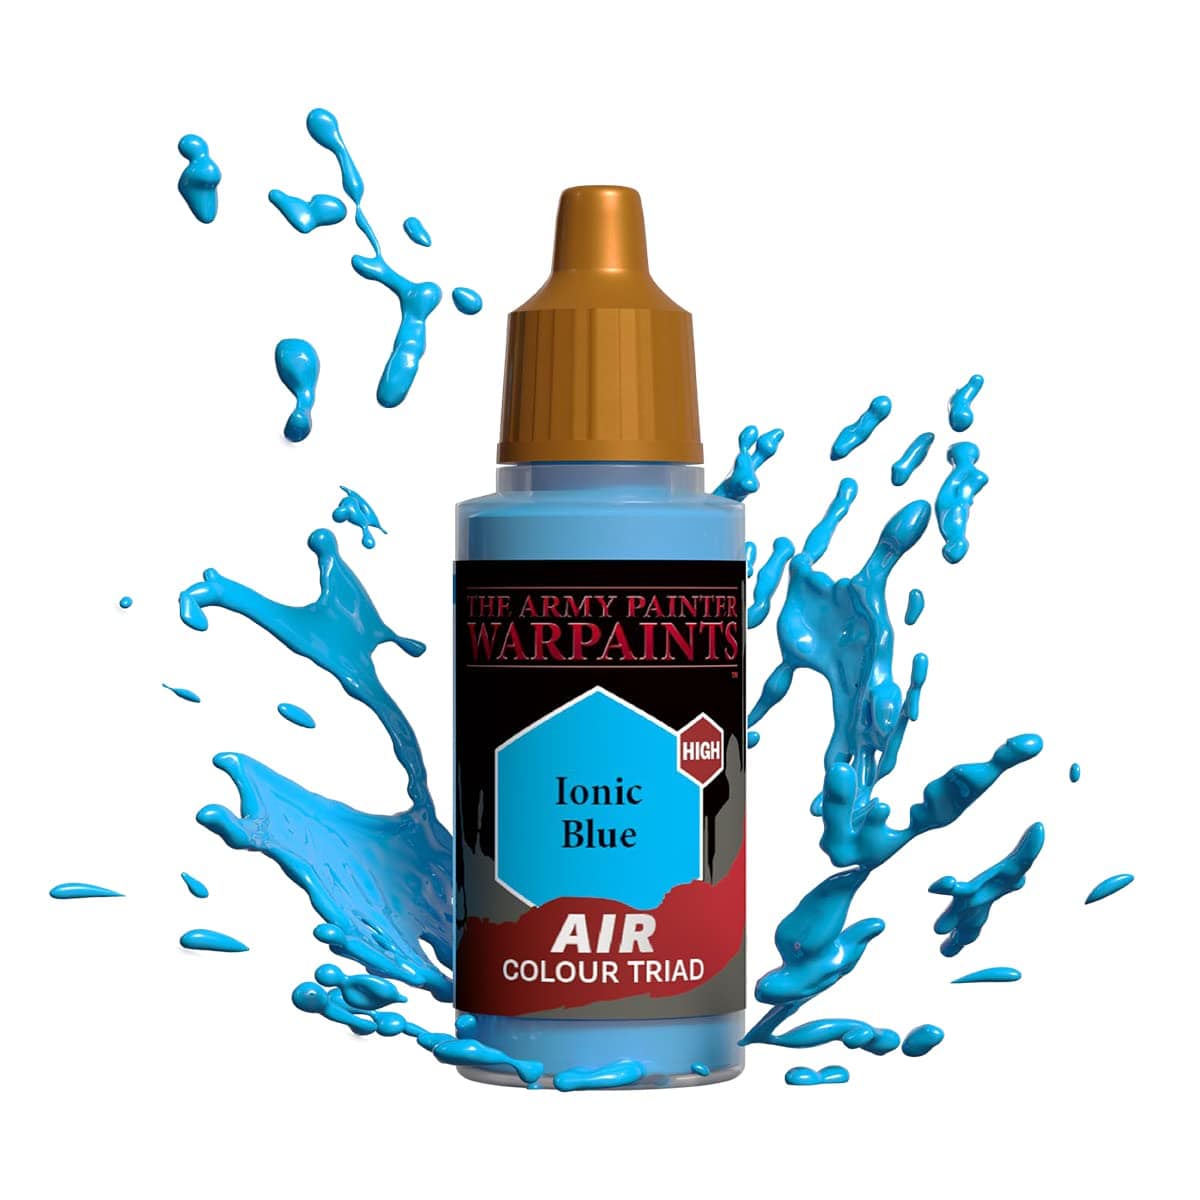 The Army Painter Accessories The Army Painter Warpaints Air: Ionic Blue 18ml